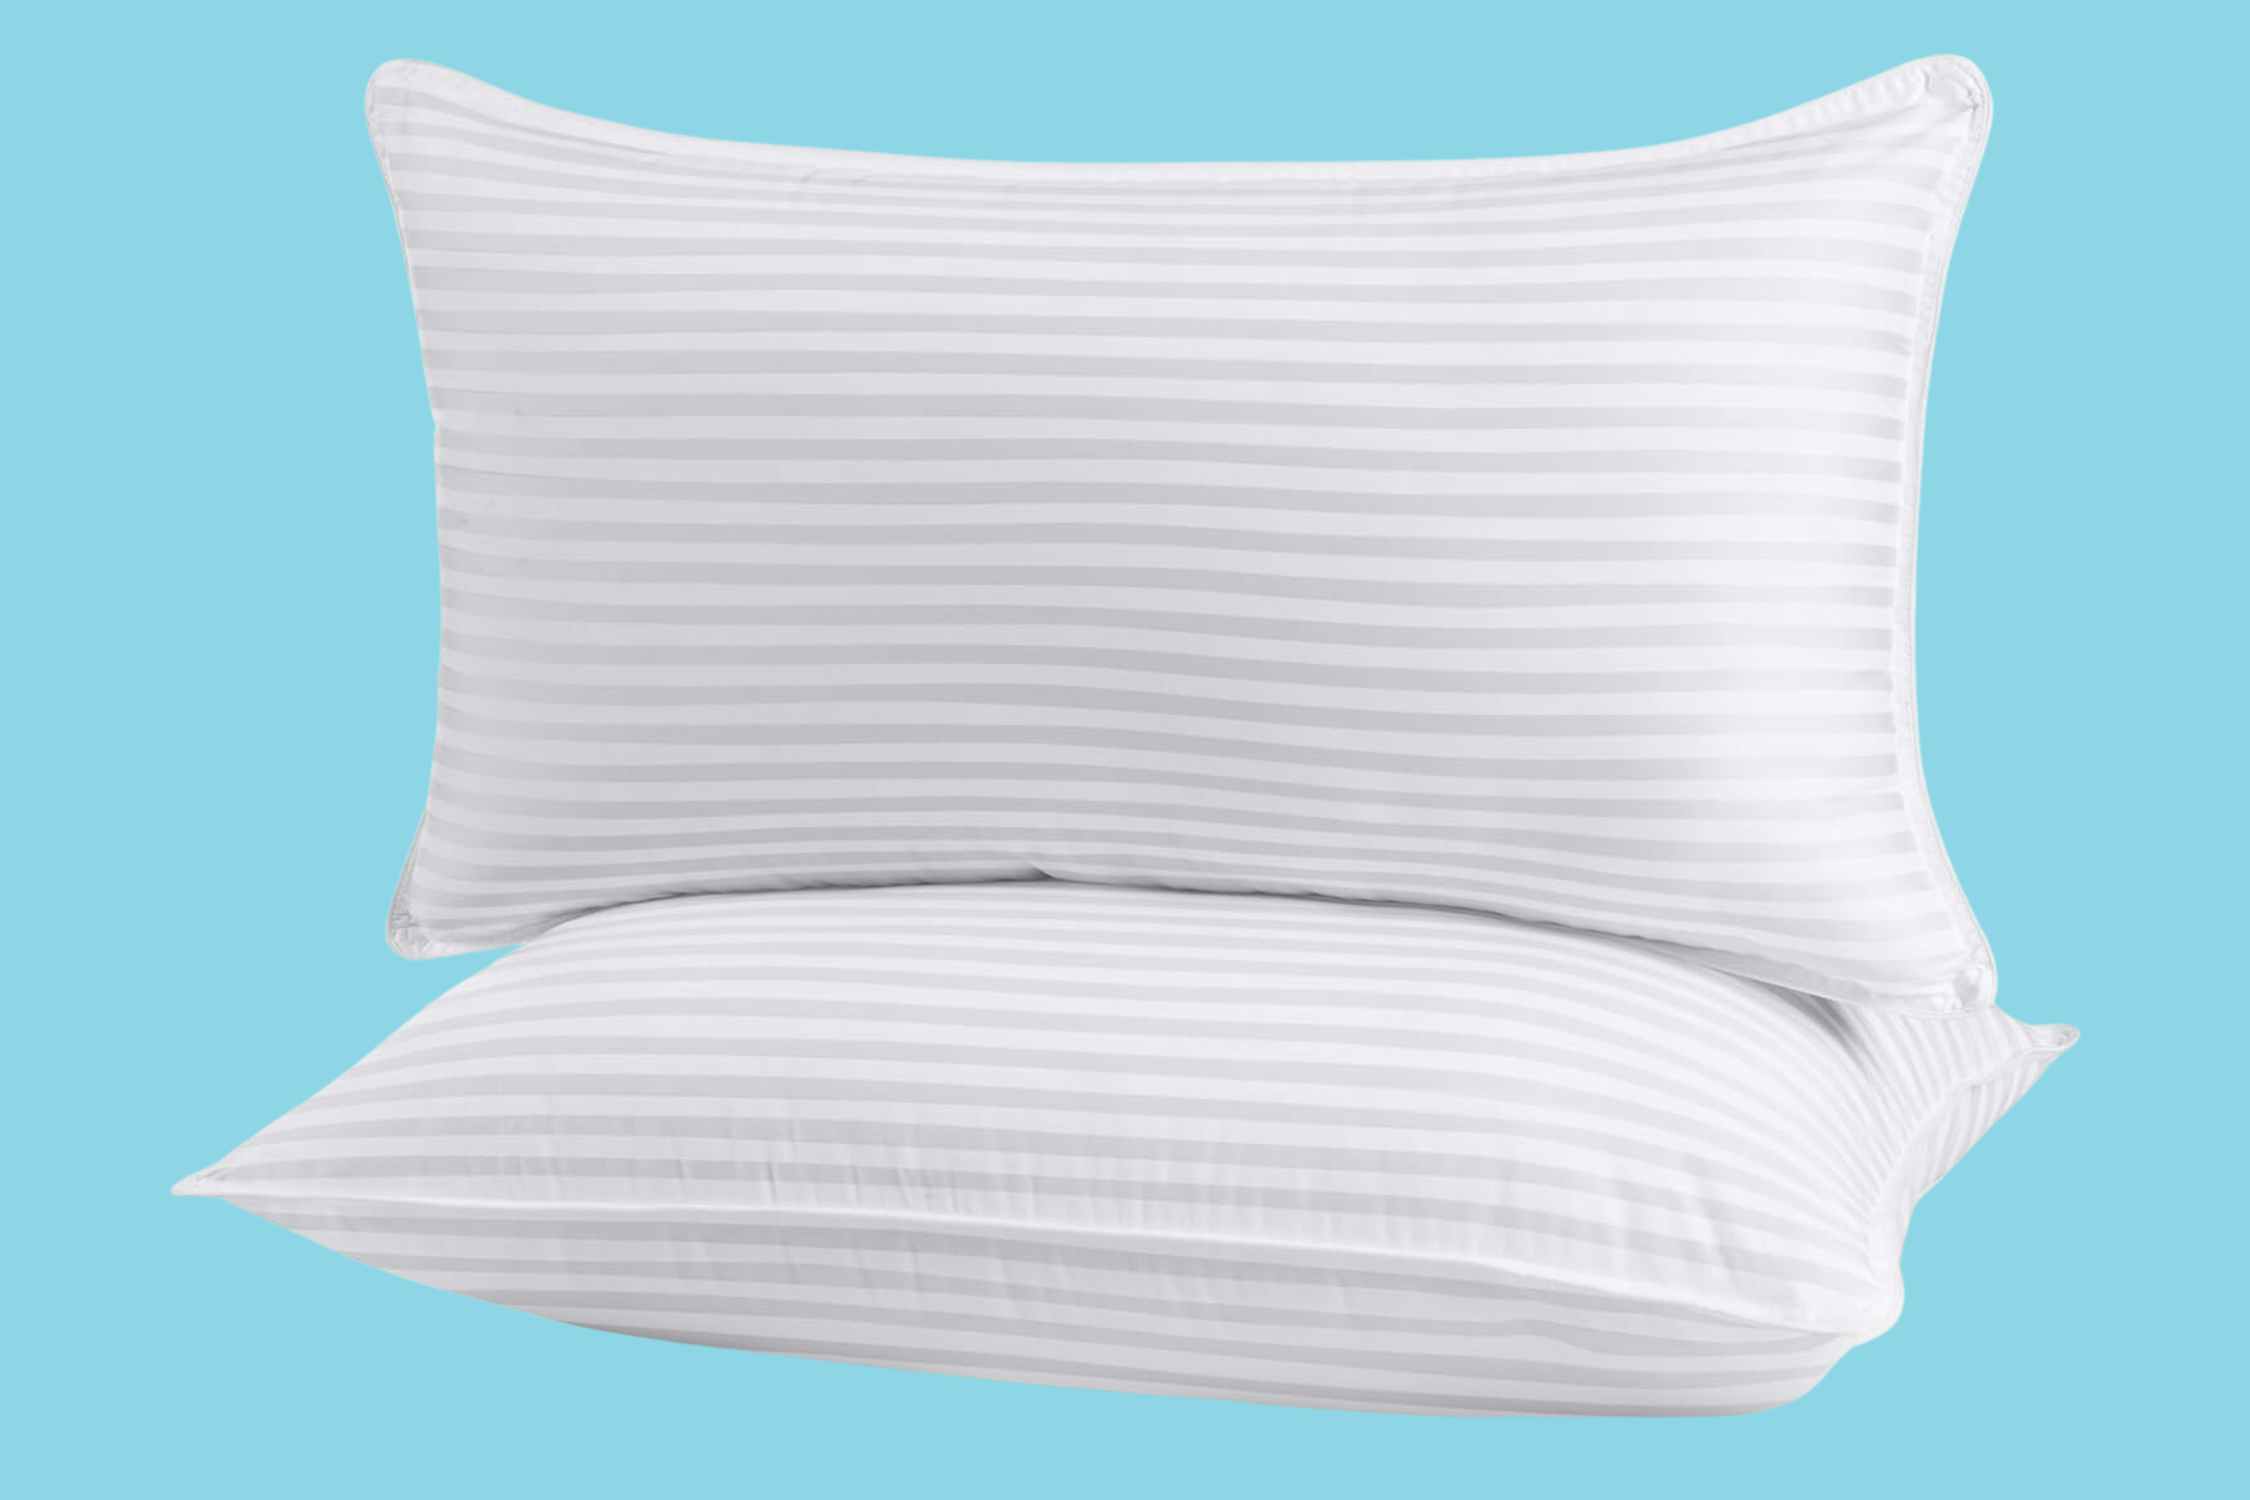 Cooling King Size Pillows 2-Pack, Only $25.59 on Amazon